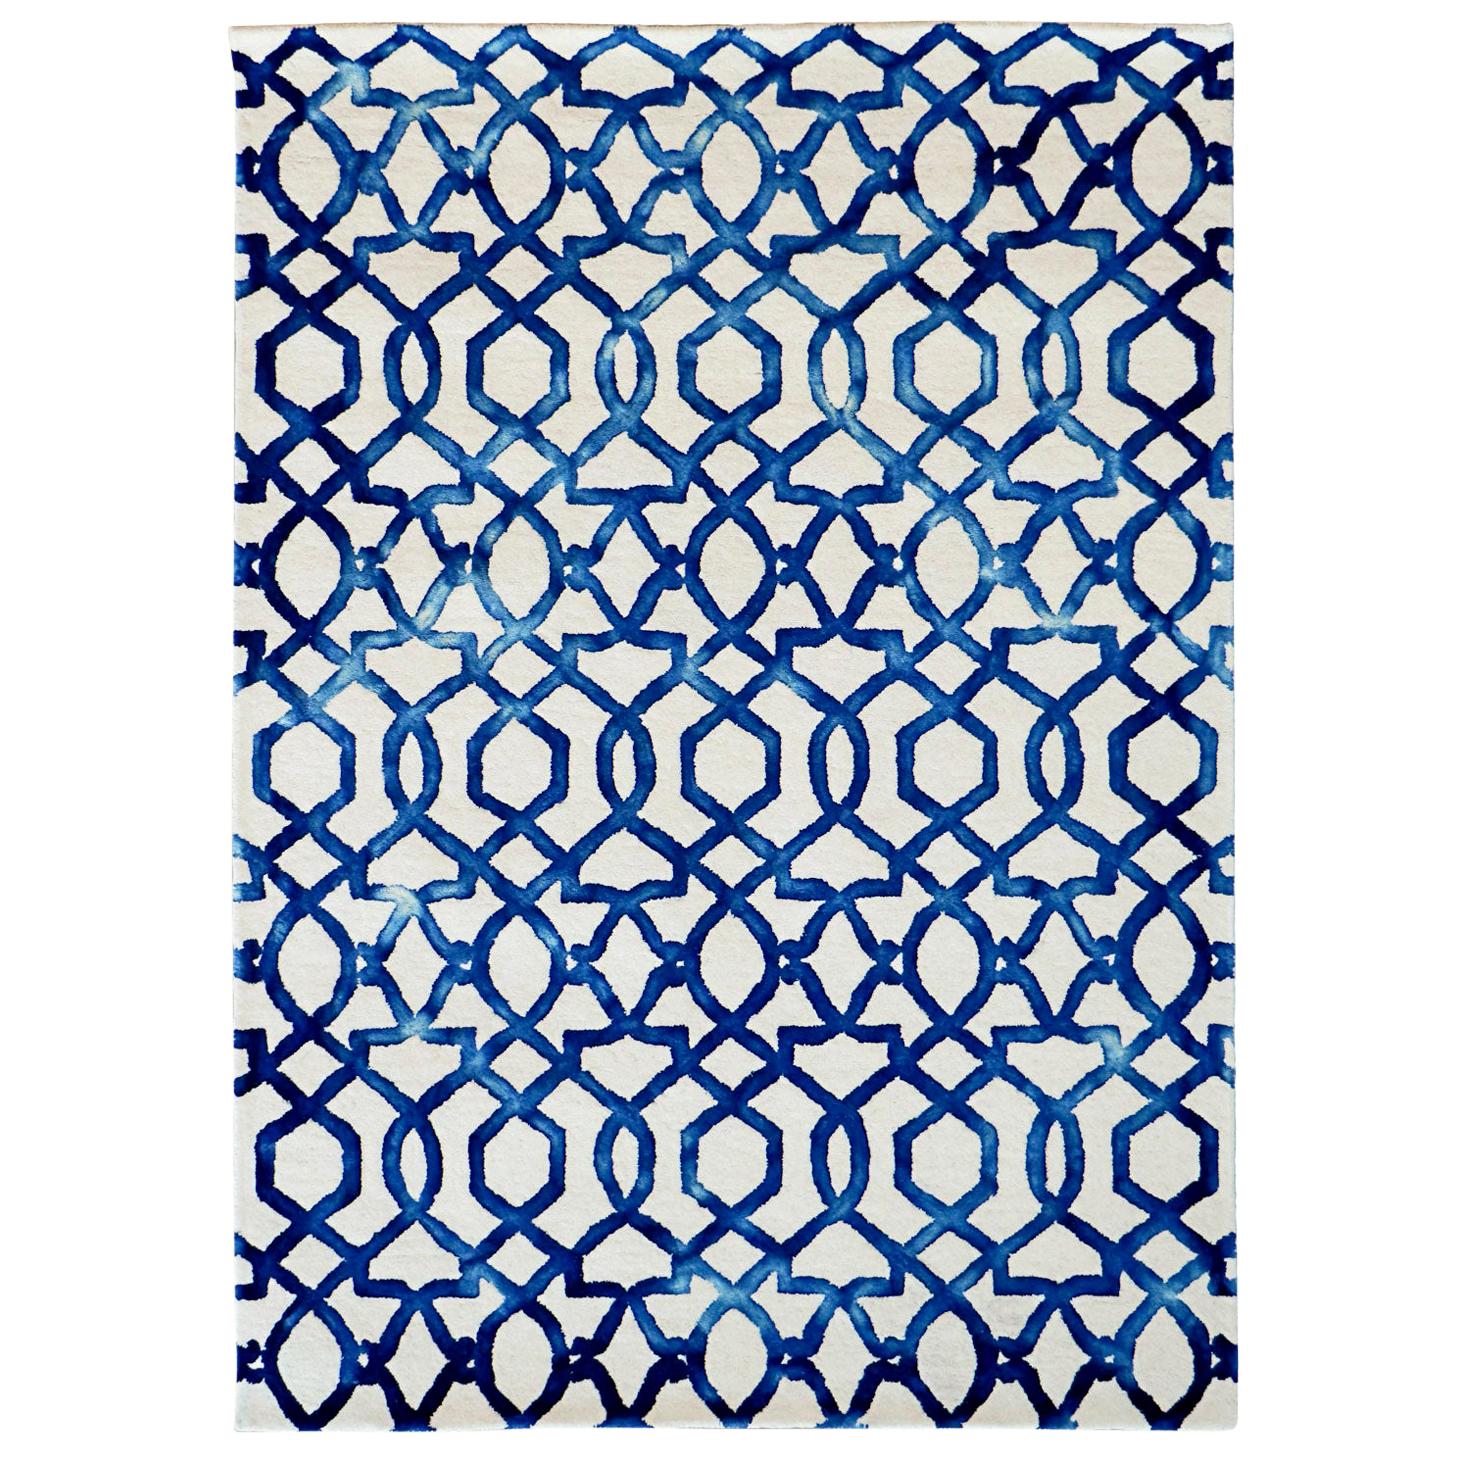 Contemporary Modern Rug New Zealand Wool by Deanna Comellini 140x200 cm